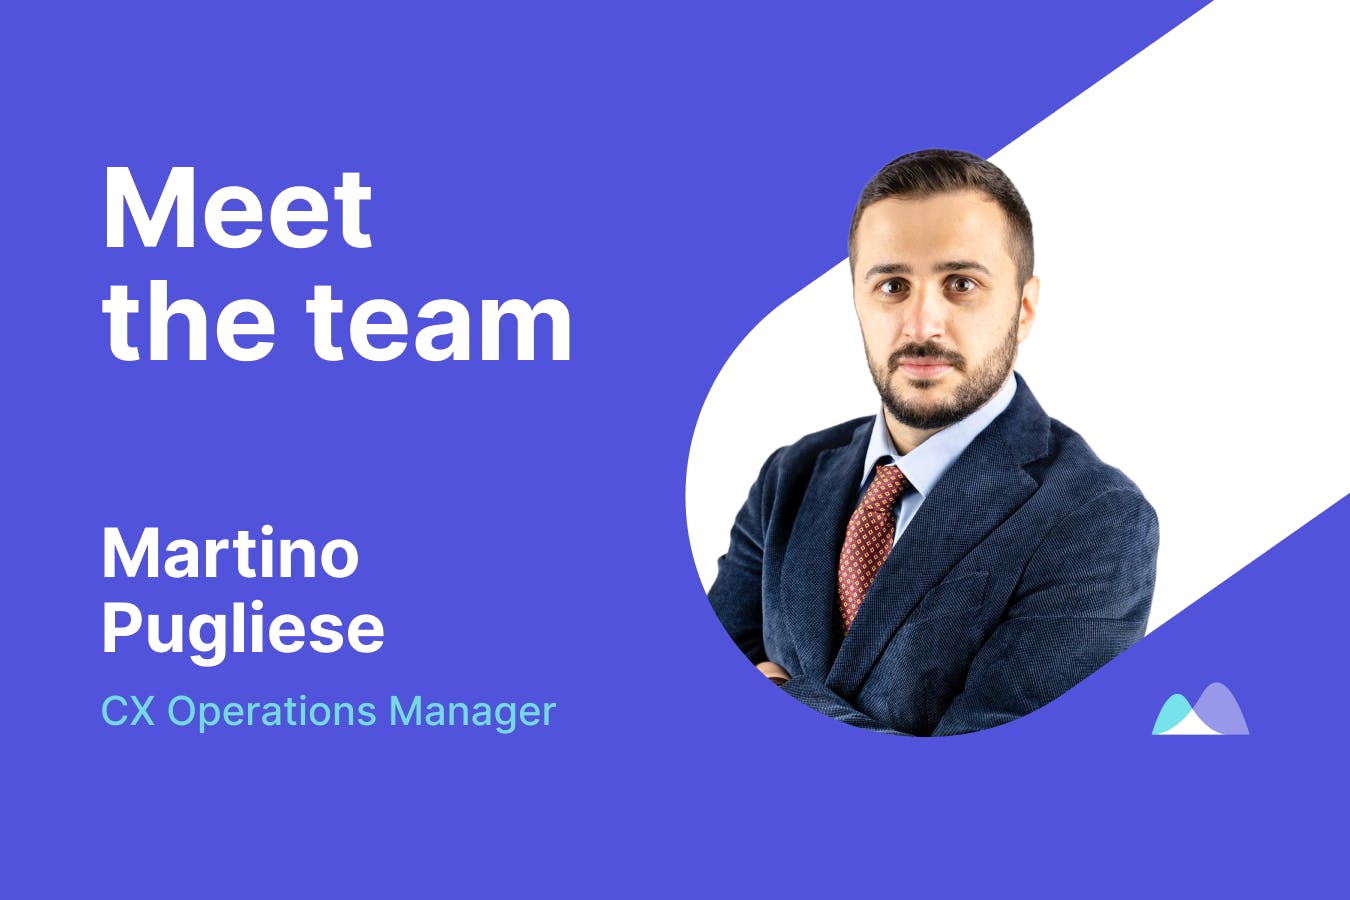 Martino Pugliese, CX Operations Manager at Smartpricing